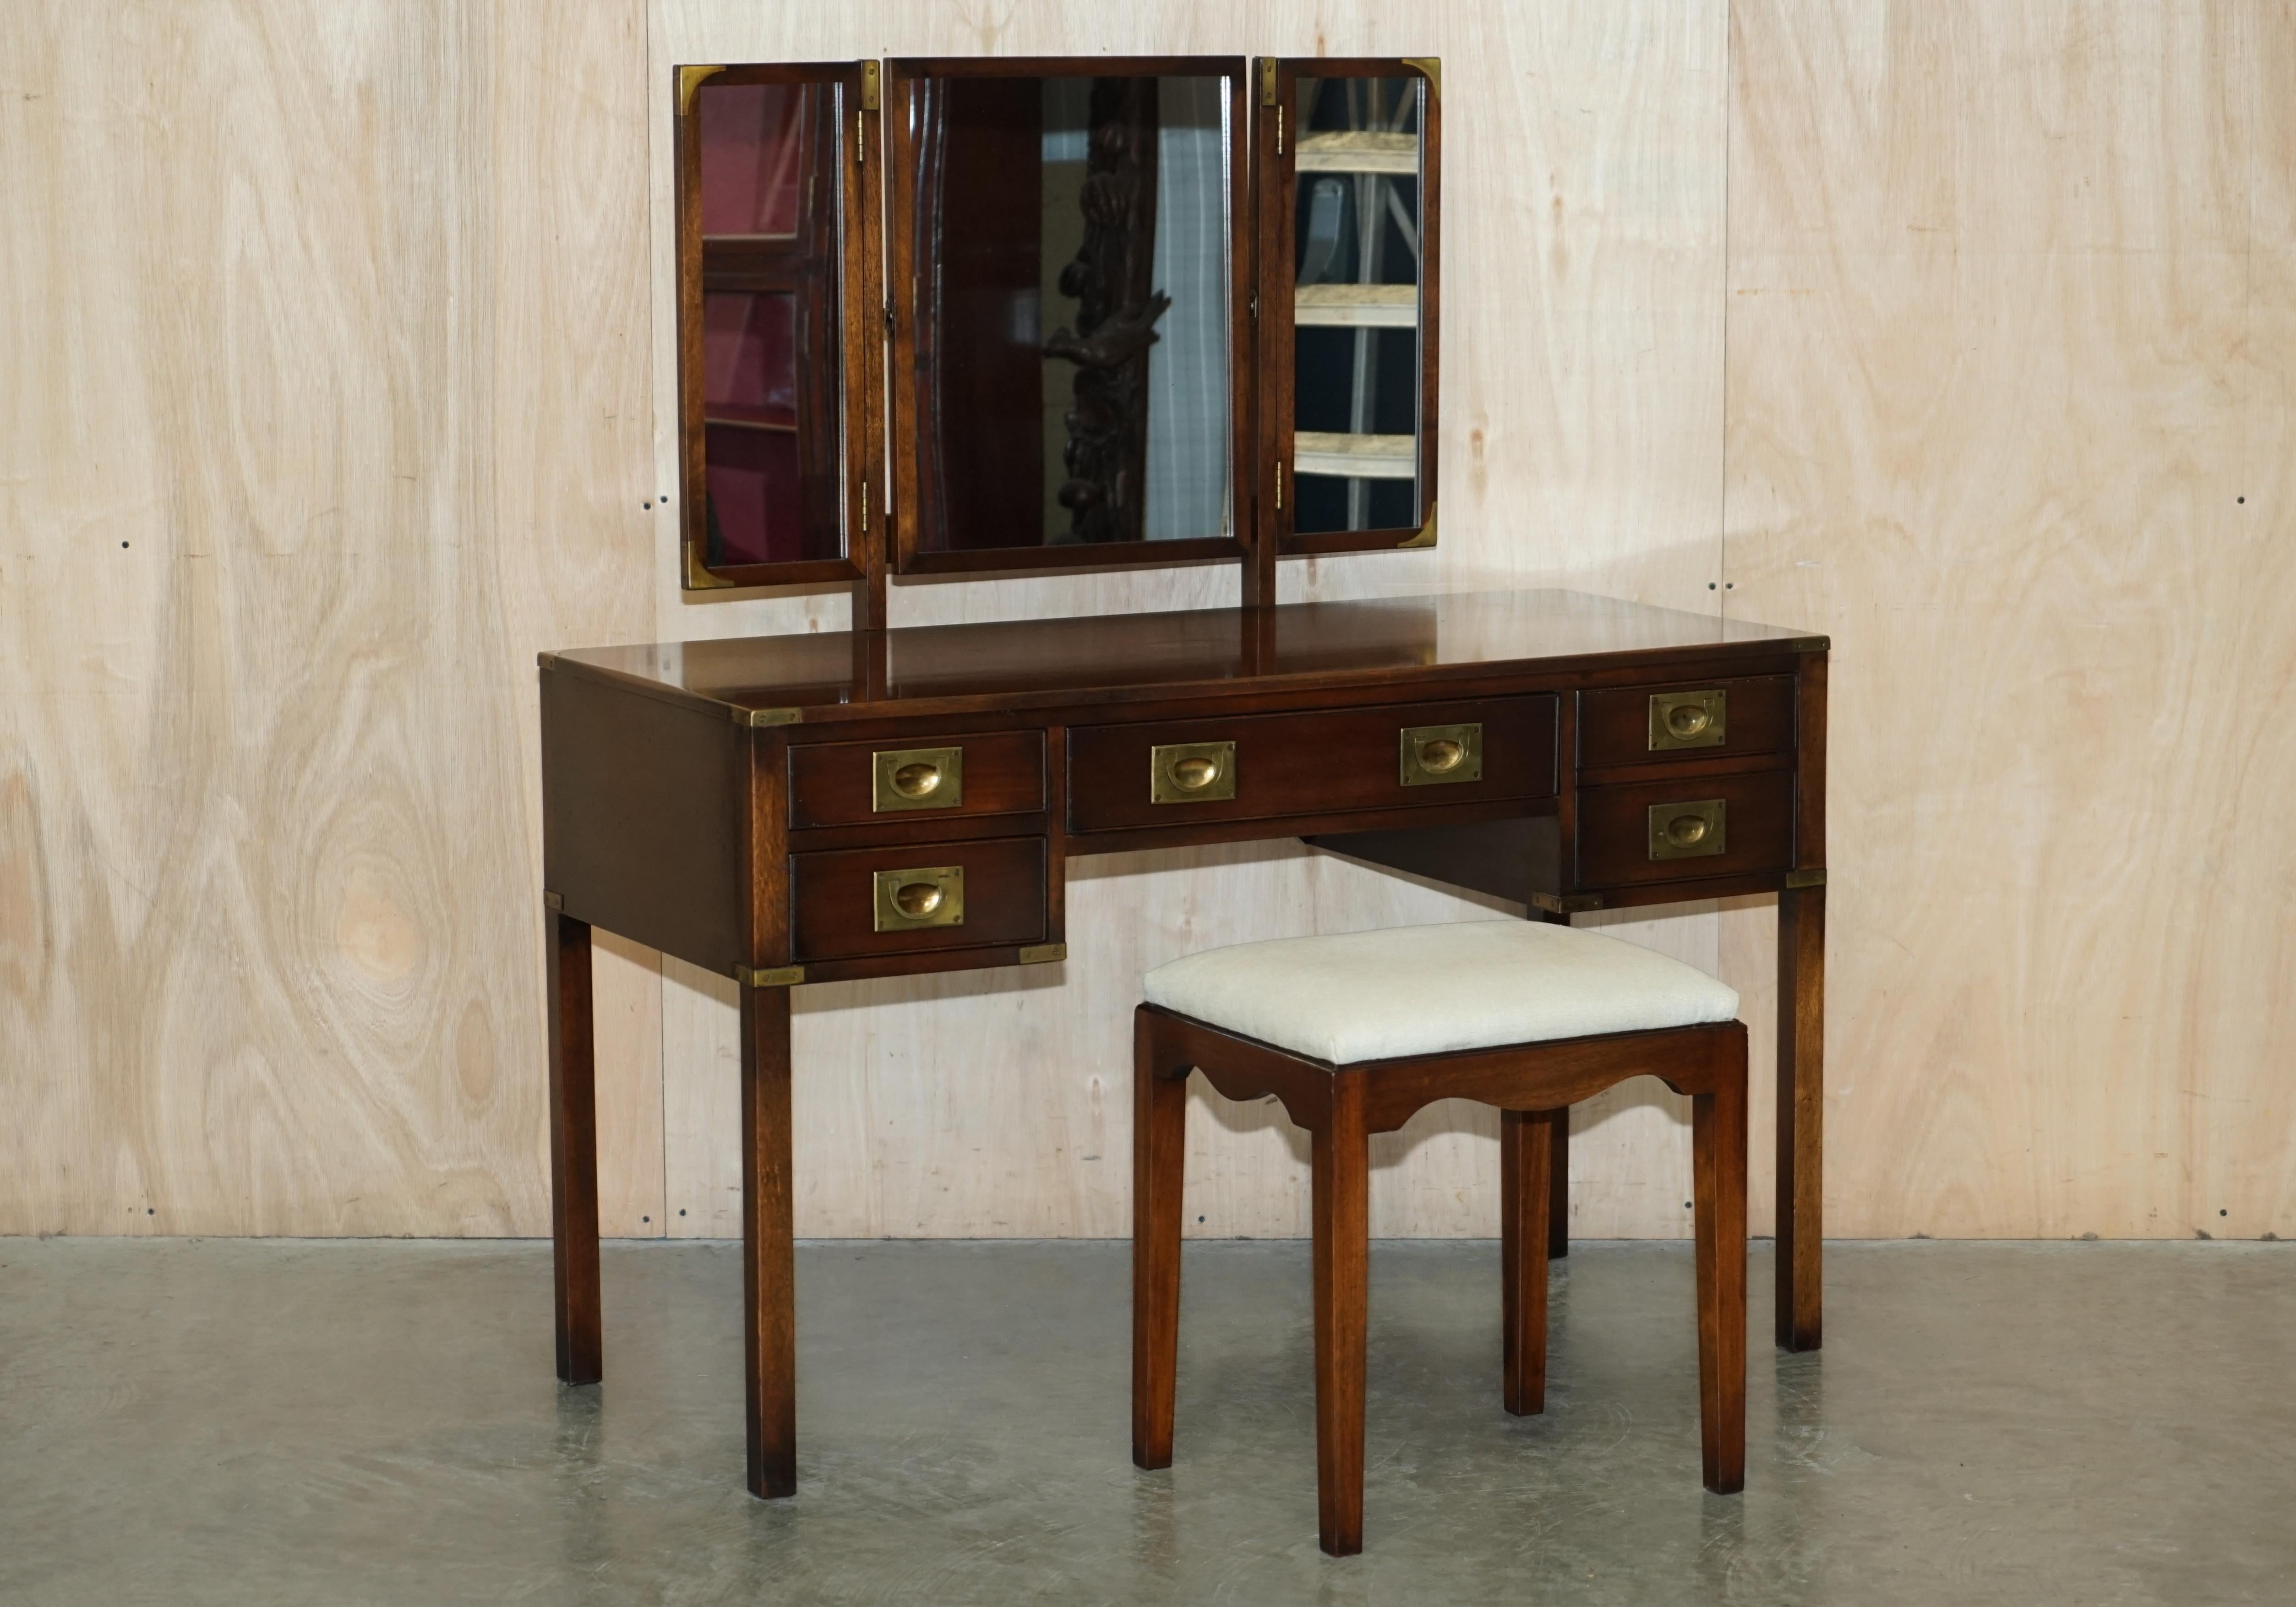 We are delighted to offer for sale this super rare, hand made in England, solid mahogany Harrods London retailed, REH Kennedy made, dressing table with trifold mirror and stool

I have never seen another campaign dressing table in all my time of